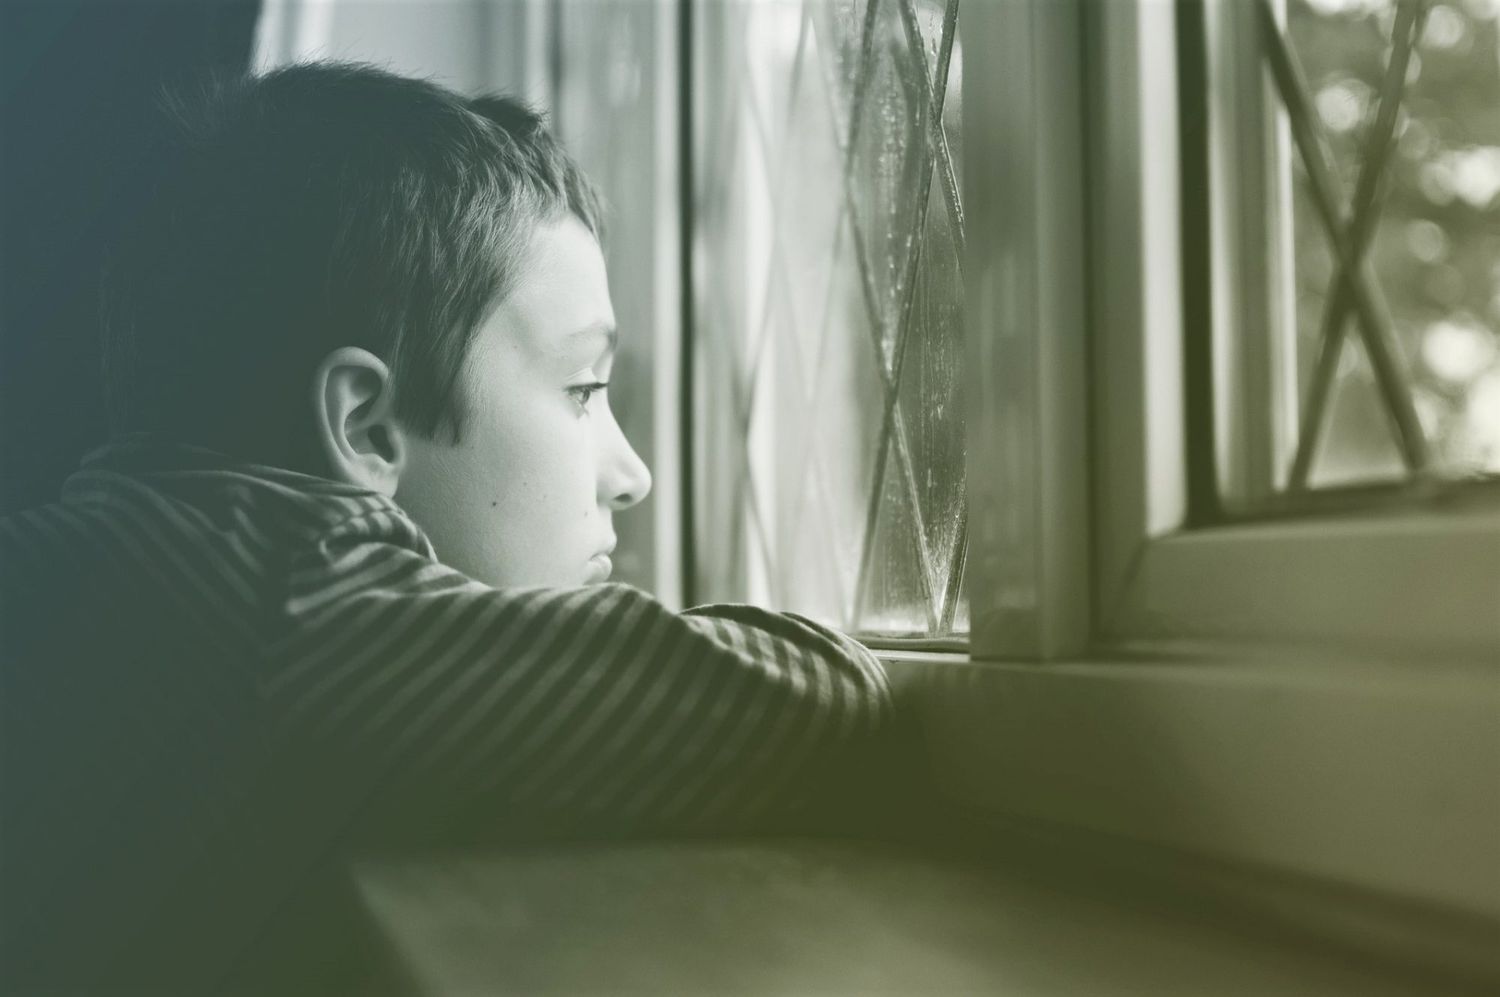 Young boy looking out window on rainy day